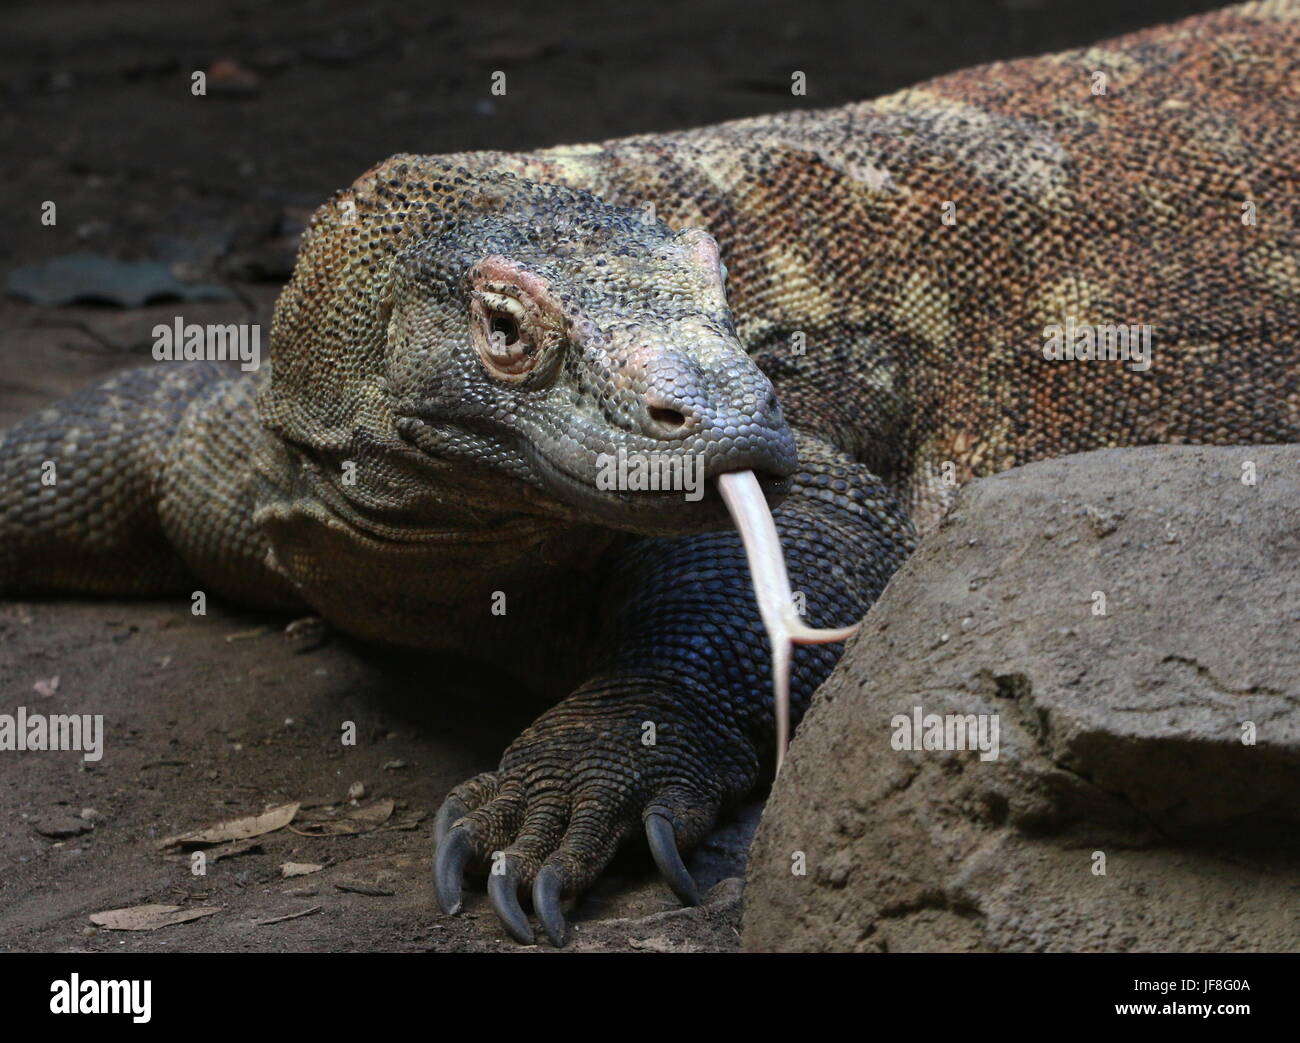 Close-up of the head of an Indonesian Komodo dragon (Varanus komodoensis), forked tongue flicking out, picking up scents in the air. Stock Photo